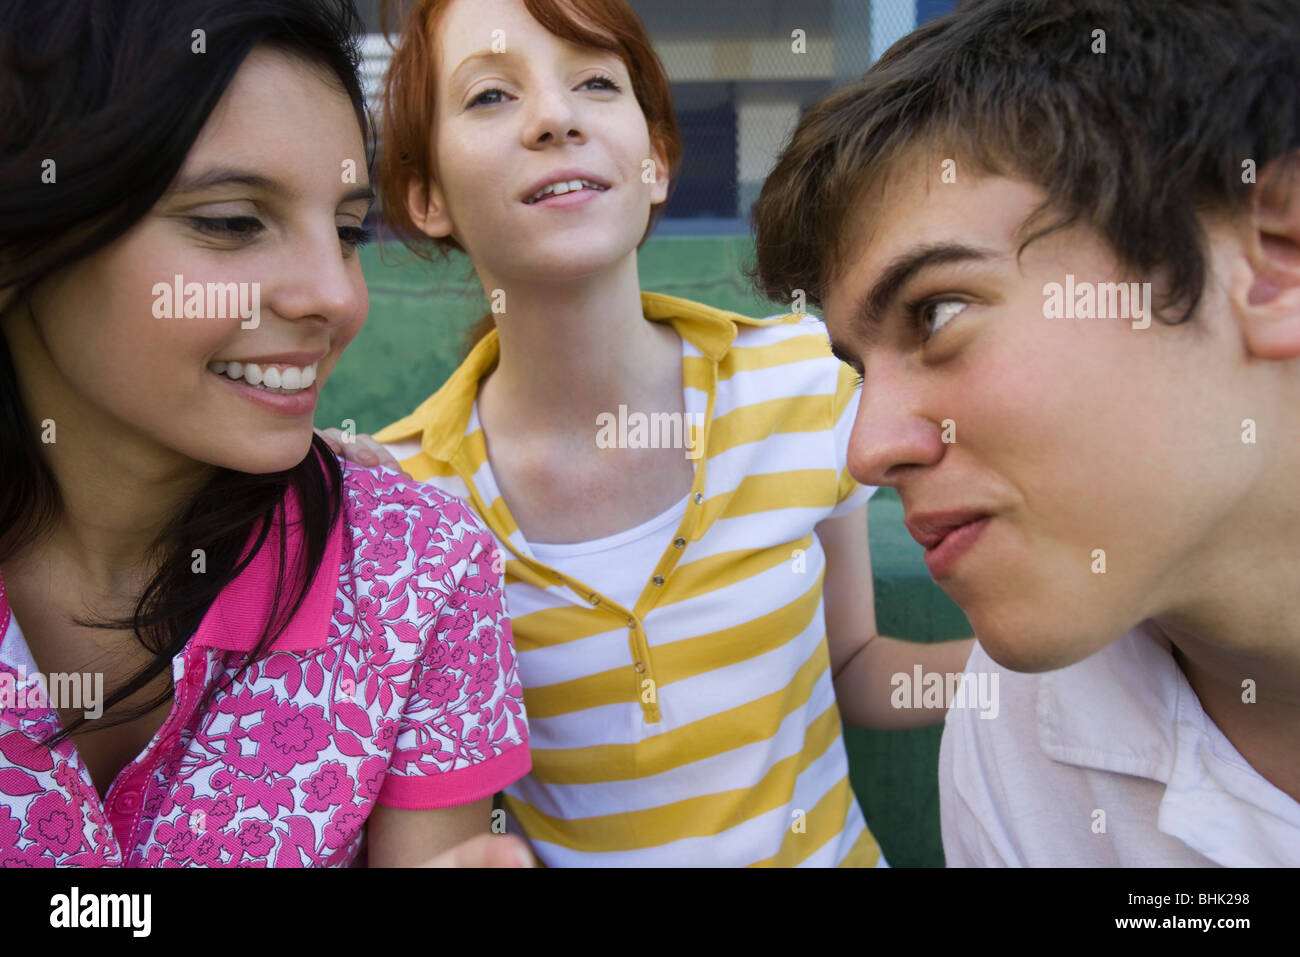 Teenage boy playfully looking at girl friend with playful expression Stock Photo